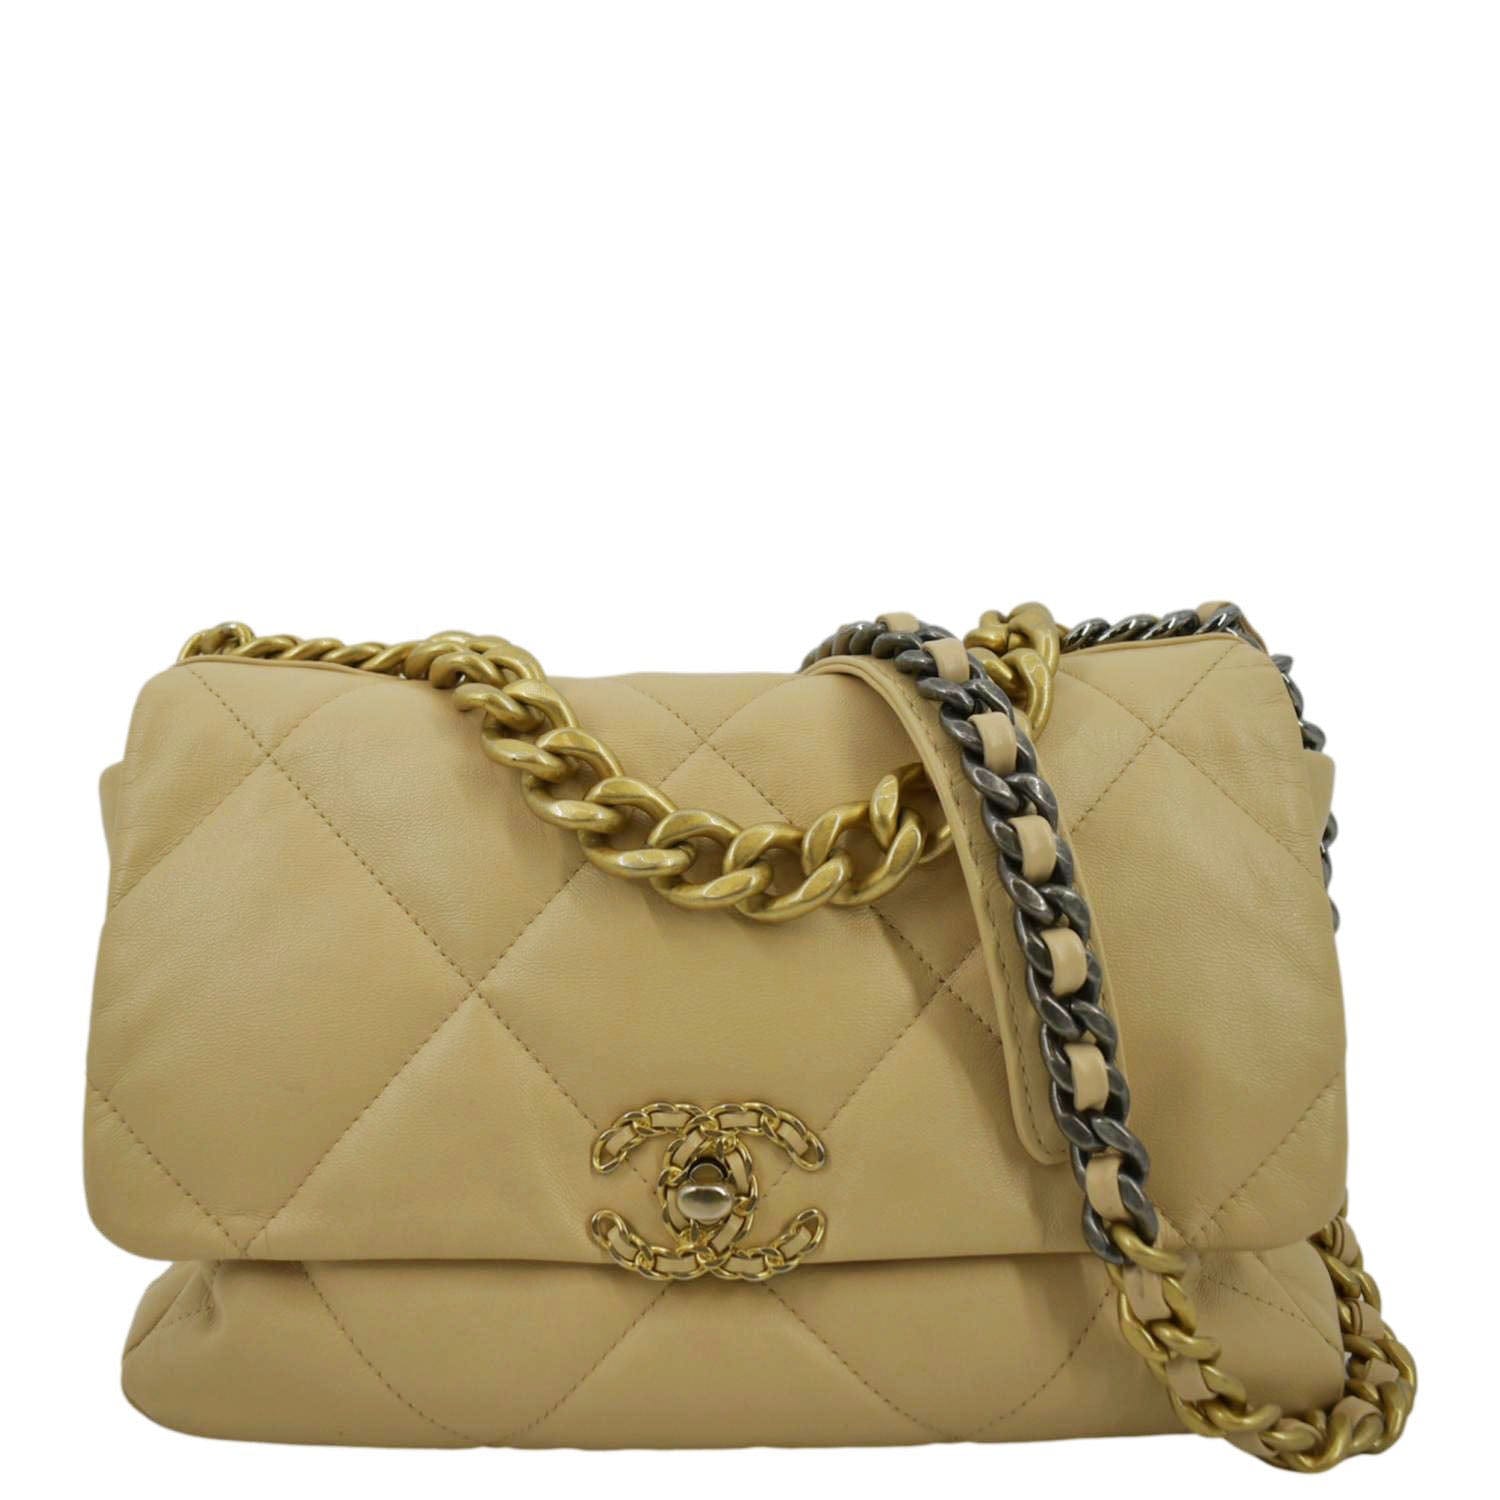 Chanel Chanel 19 Small Flap Bag